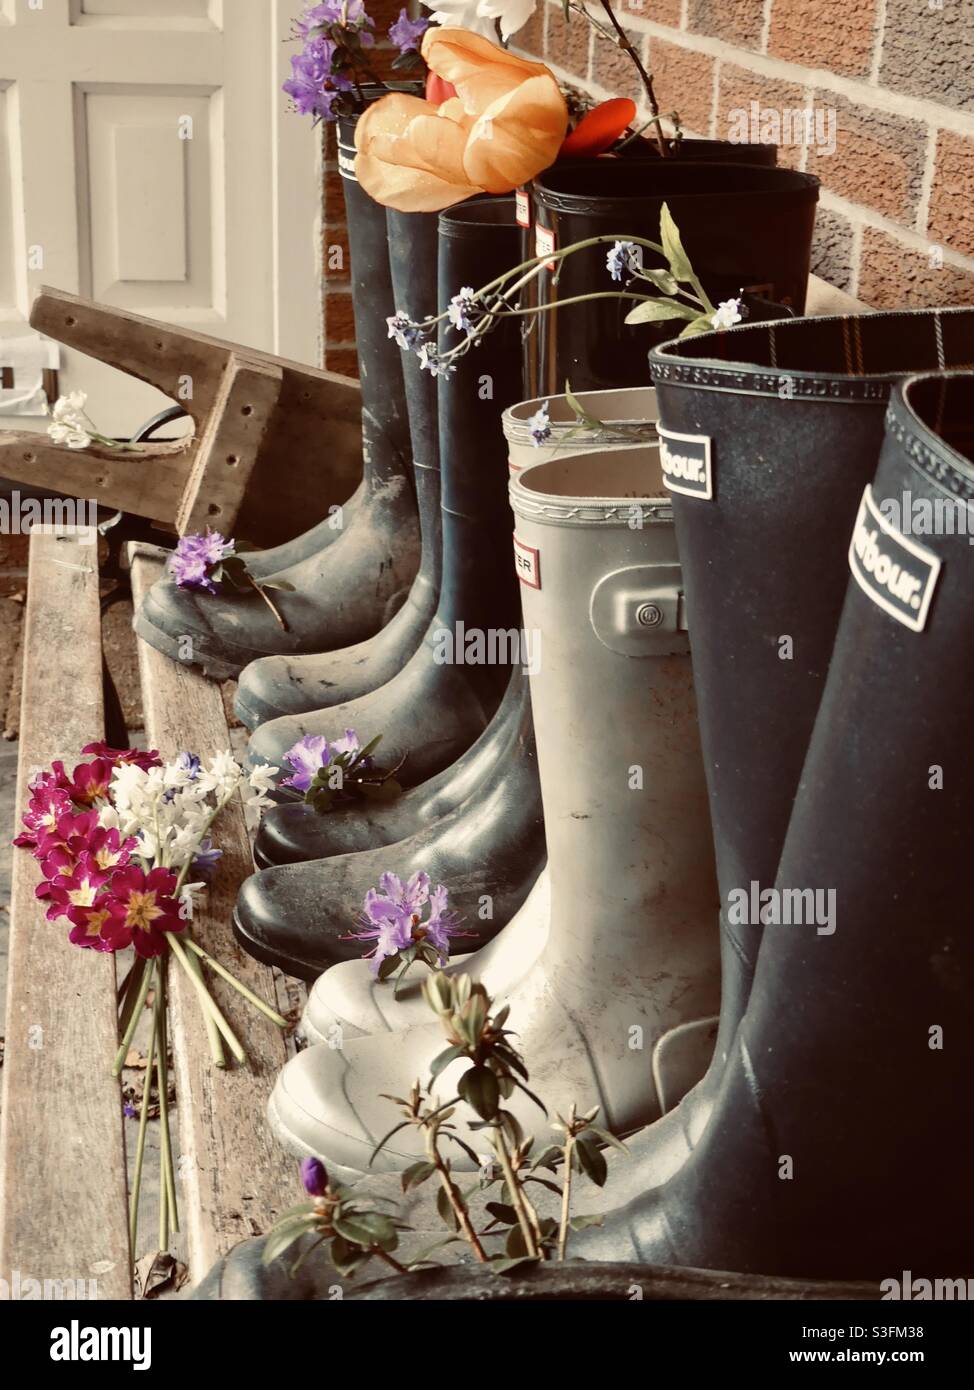 Love 💕wellies on a rainy day ☔️⛈🌧 Stock Photo